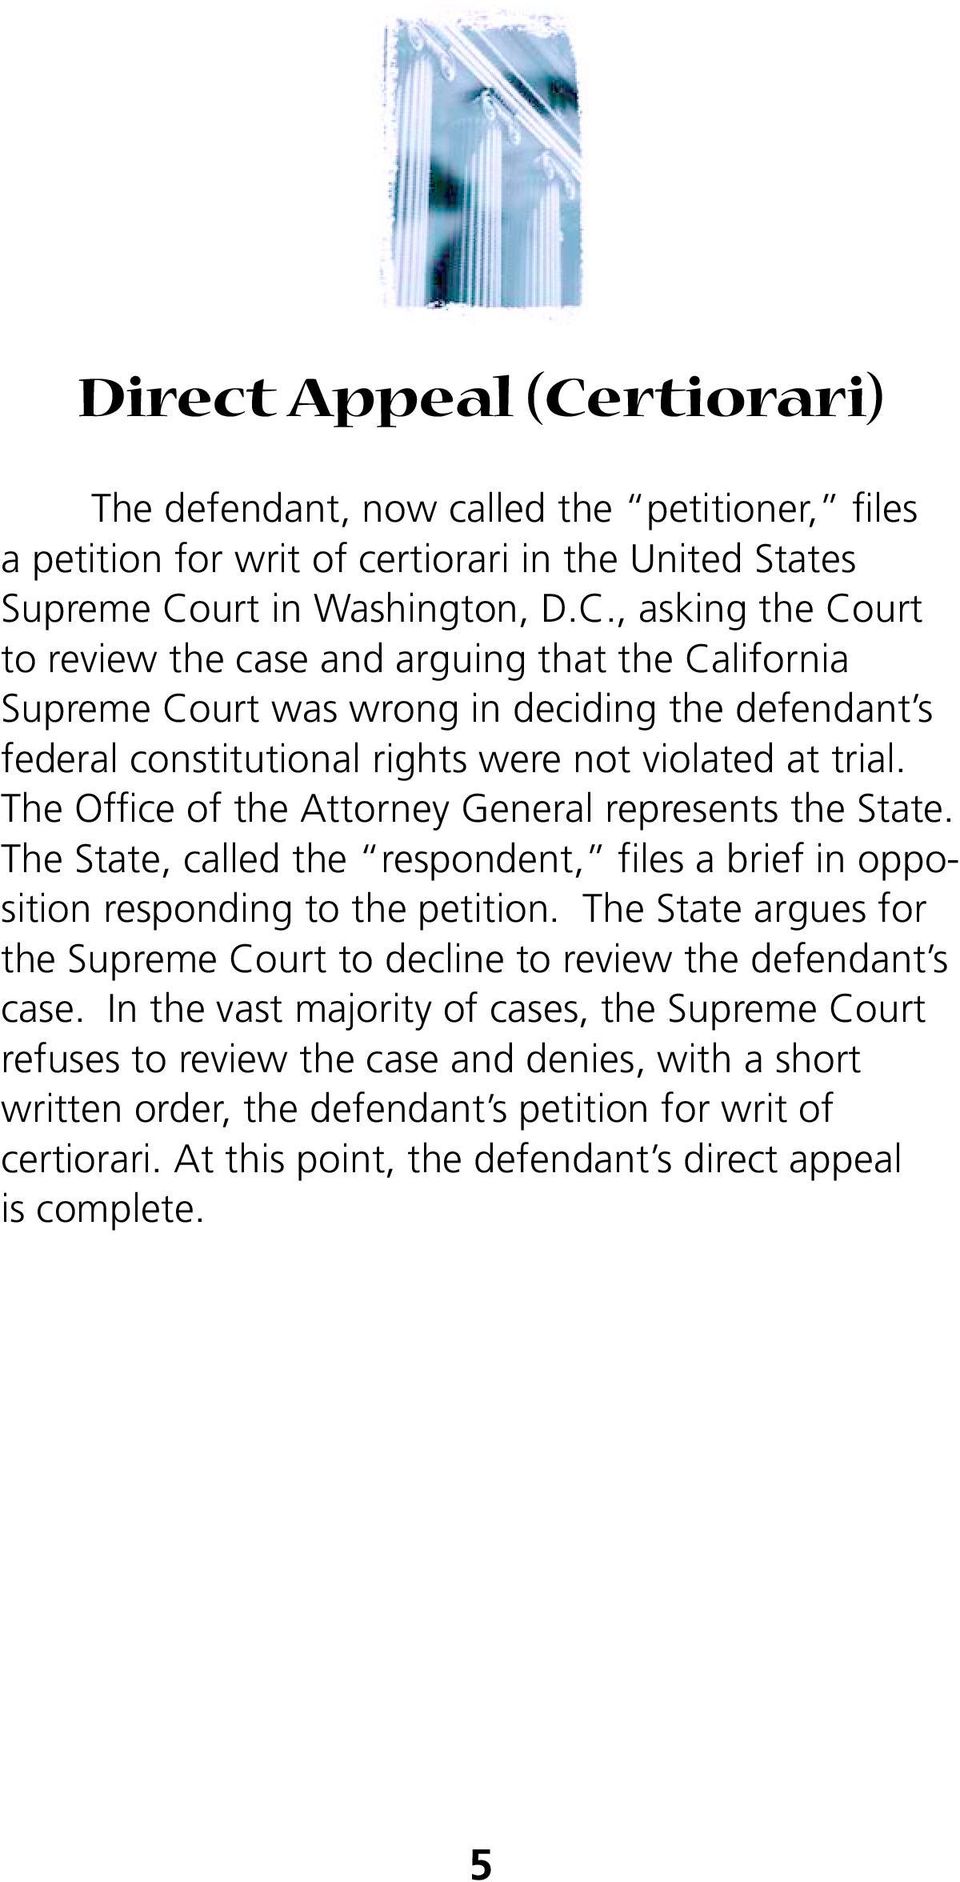 The State argues for the Supreme Court to decline to review the defendant s case.